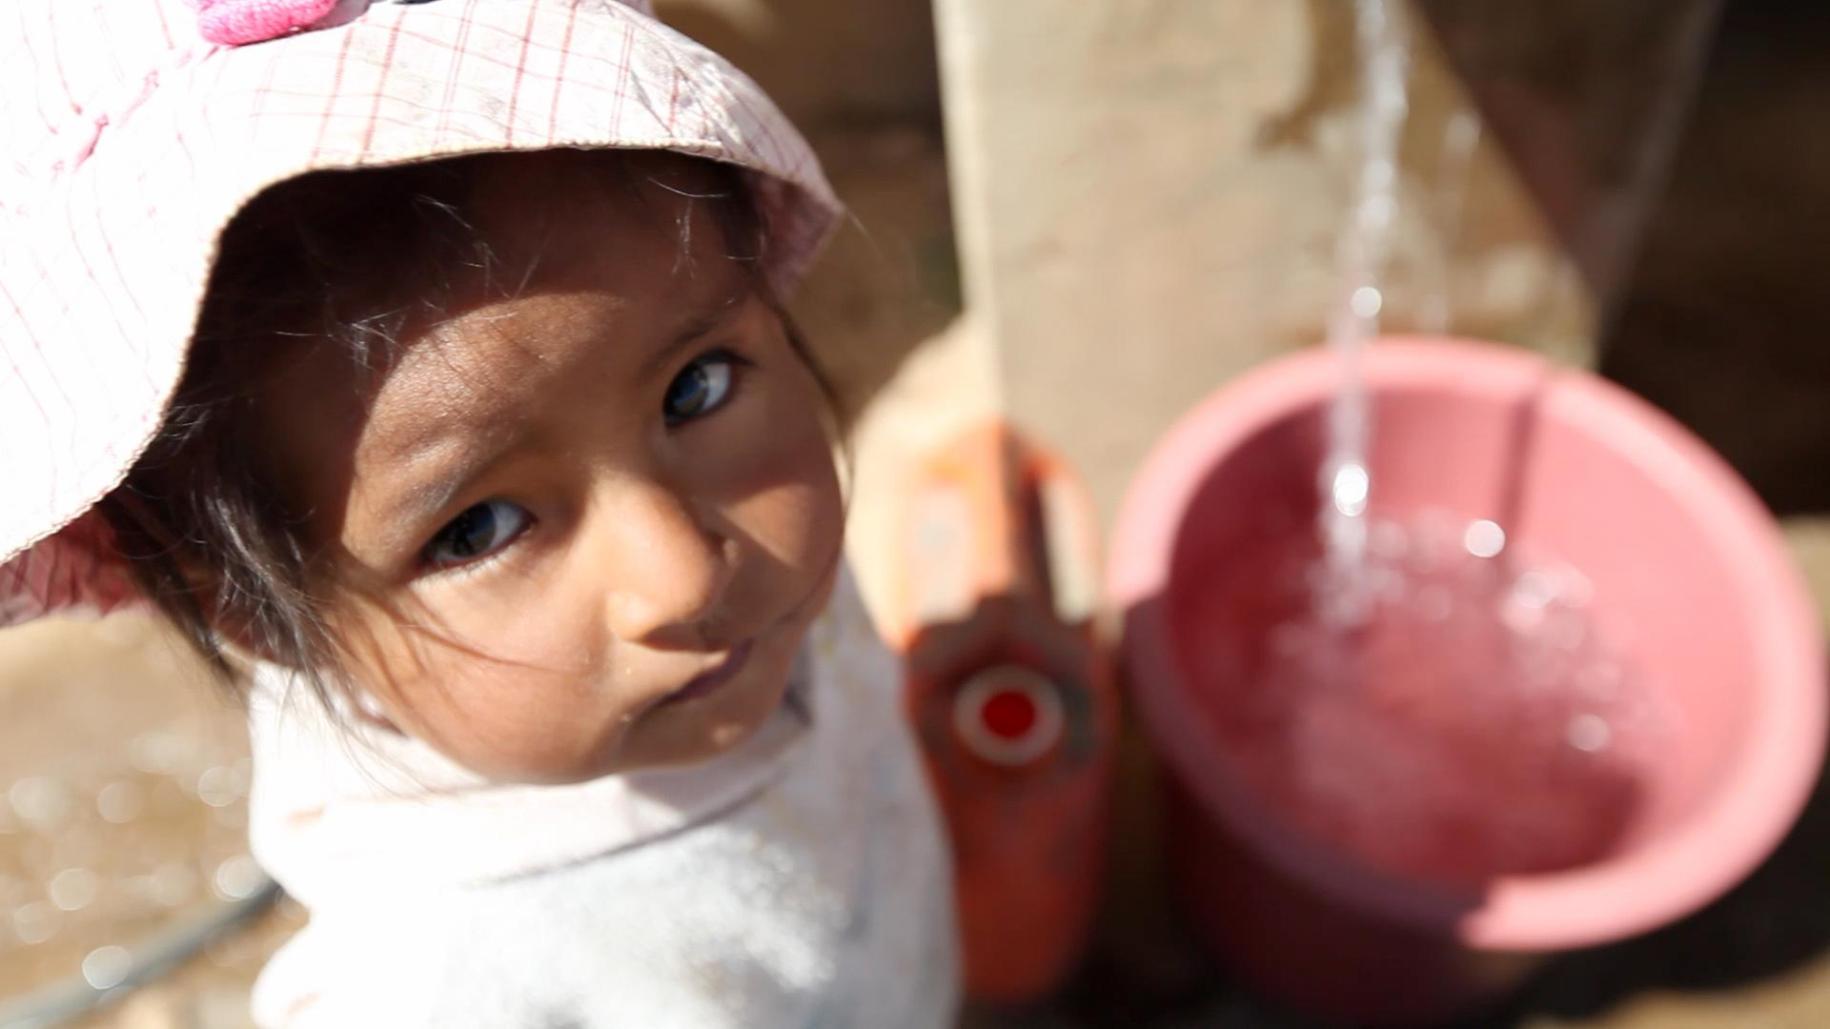 Little girl looks at the camera as water fills her container.